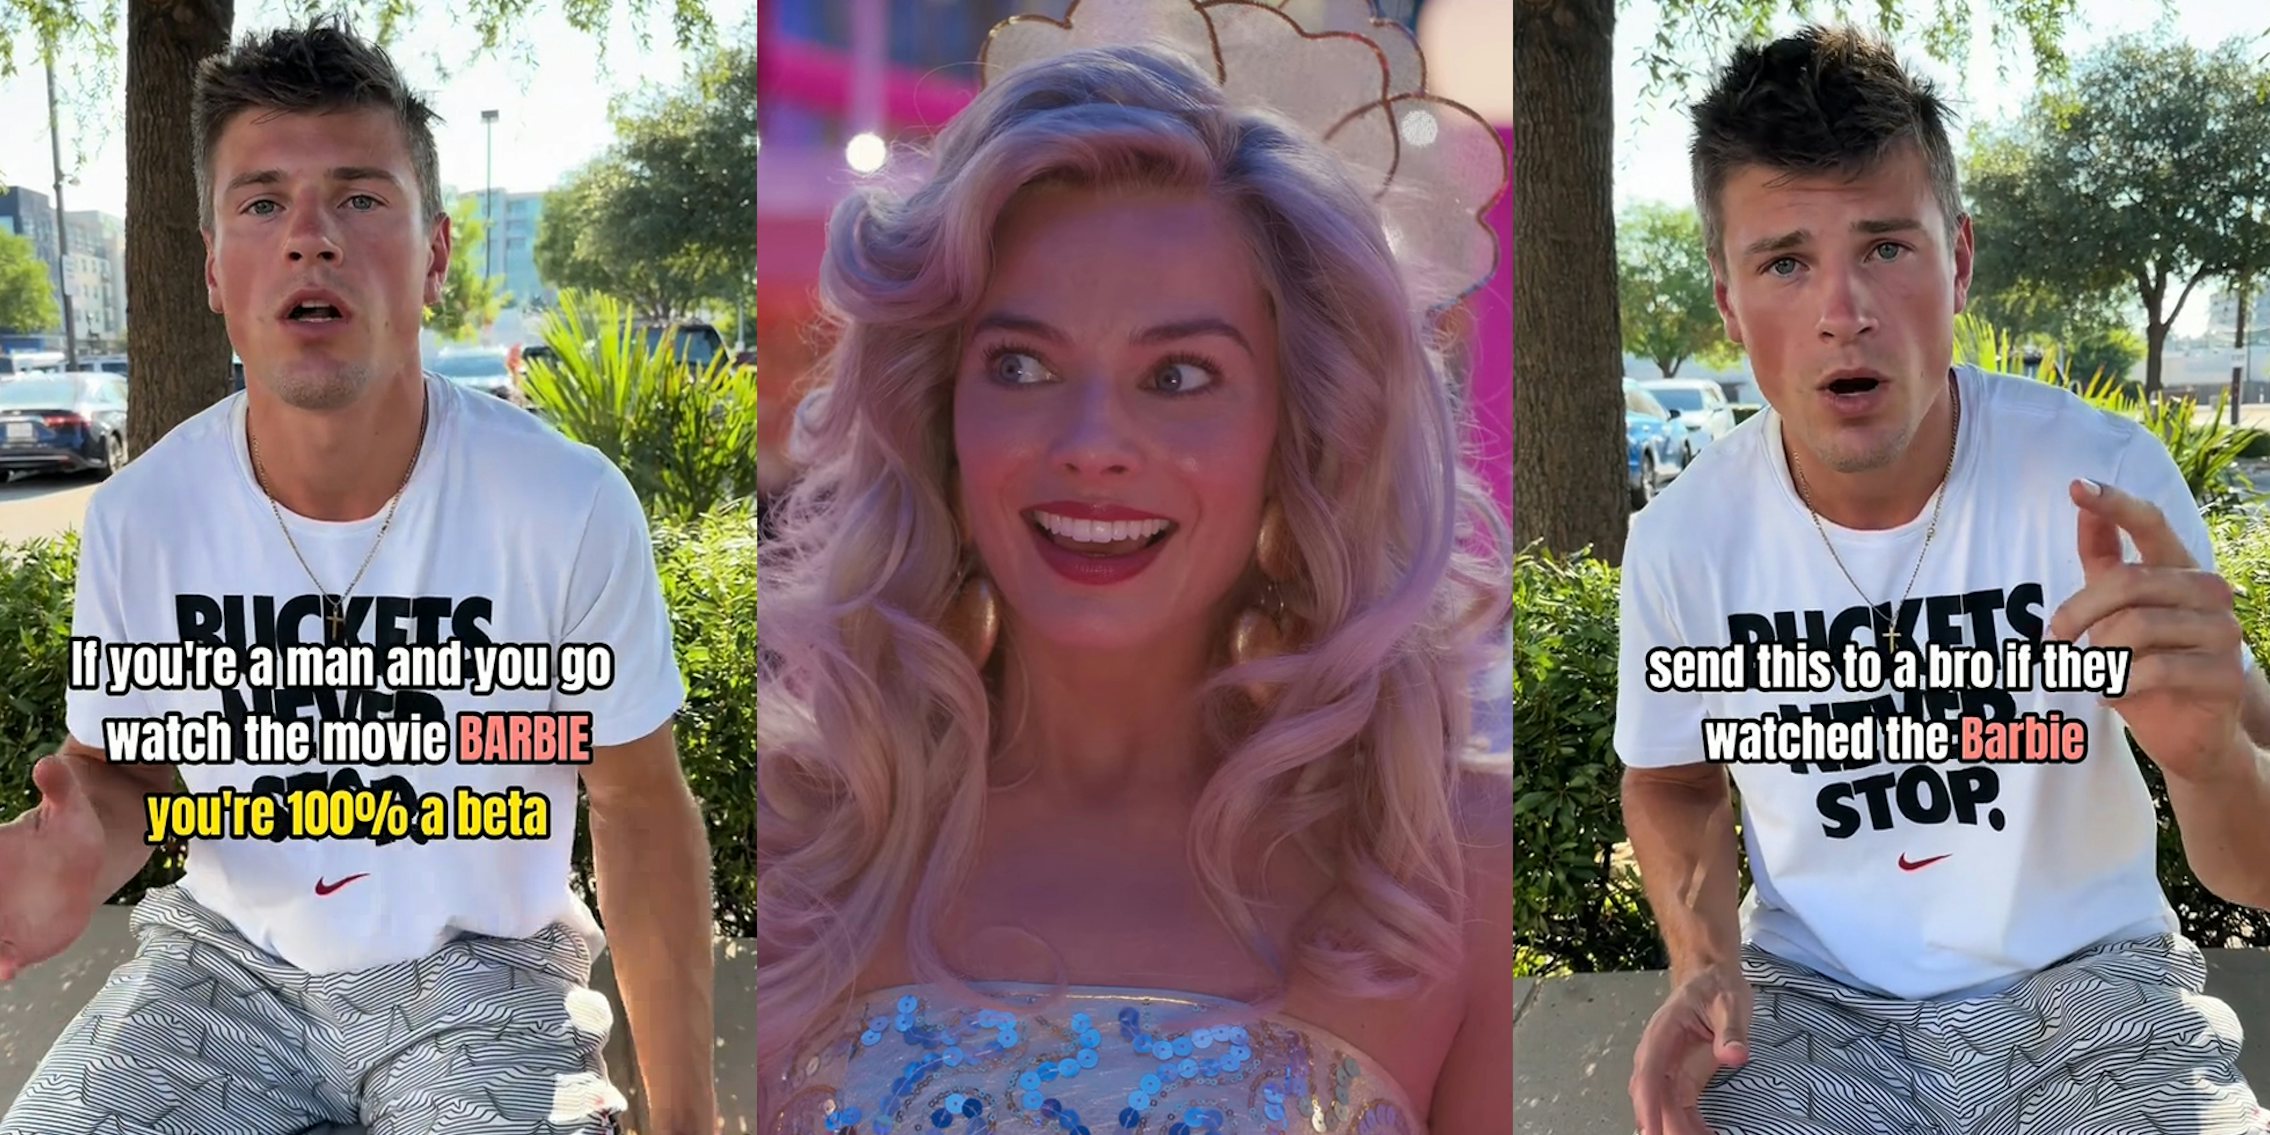 man speaking outside with caption 'If you're a man and you go watch the movie BARBIE you're 100% a beta' (l) Margot Robbie as Barbie in Barbie (c) man speaking outside with caption 'send this to a bro if they watched Barbie' (r)